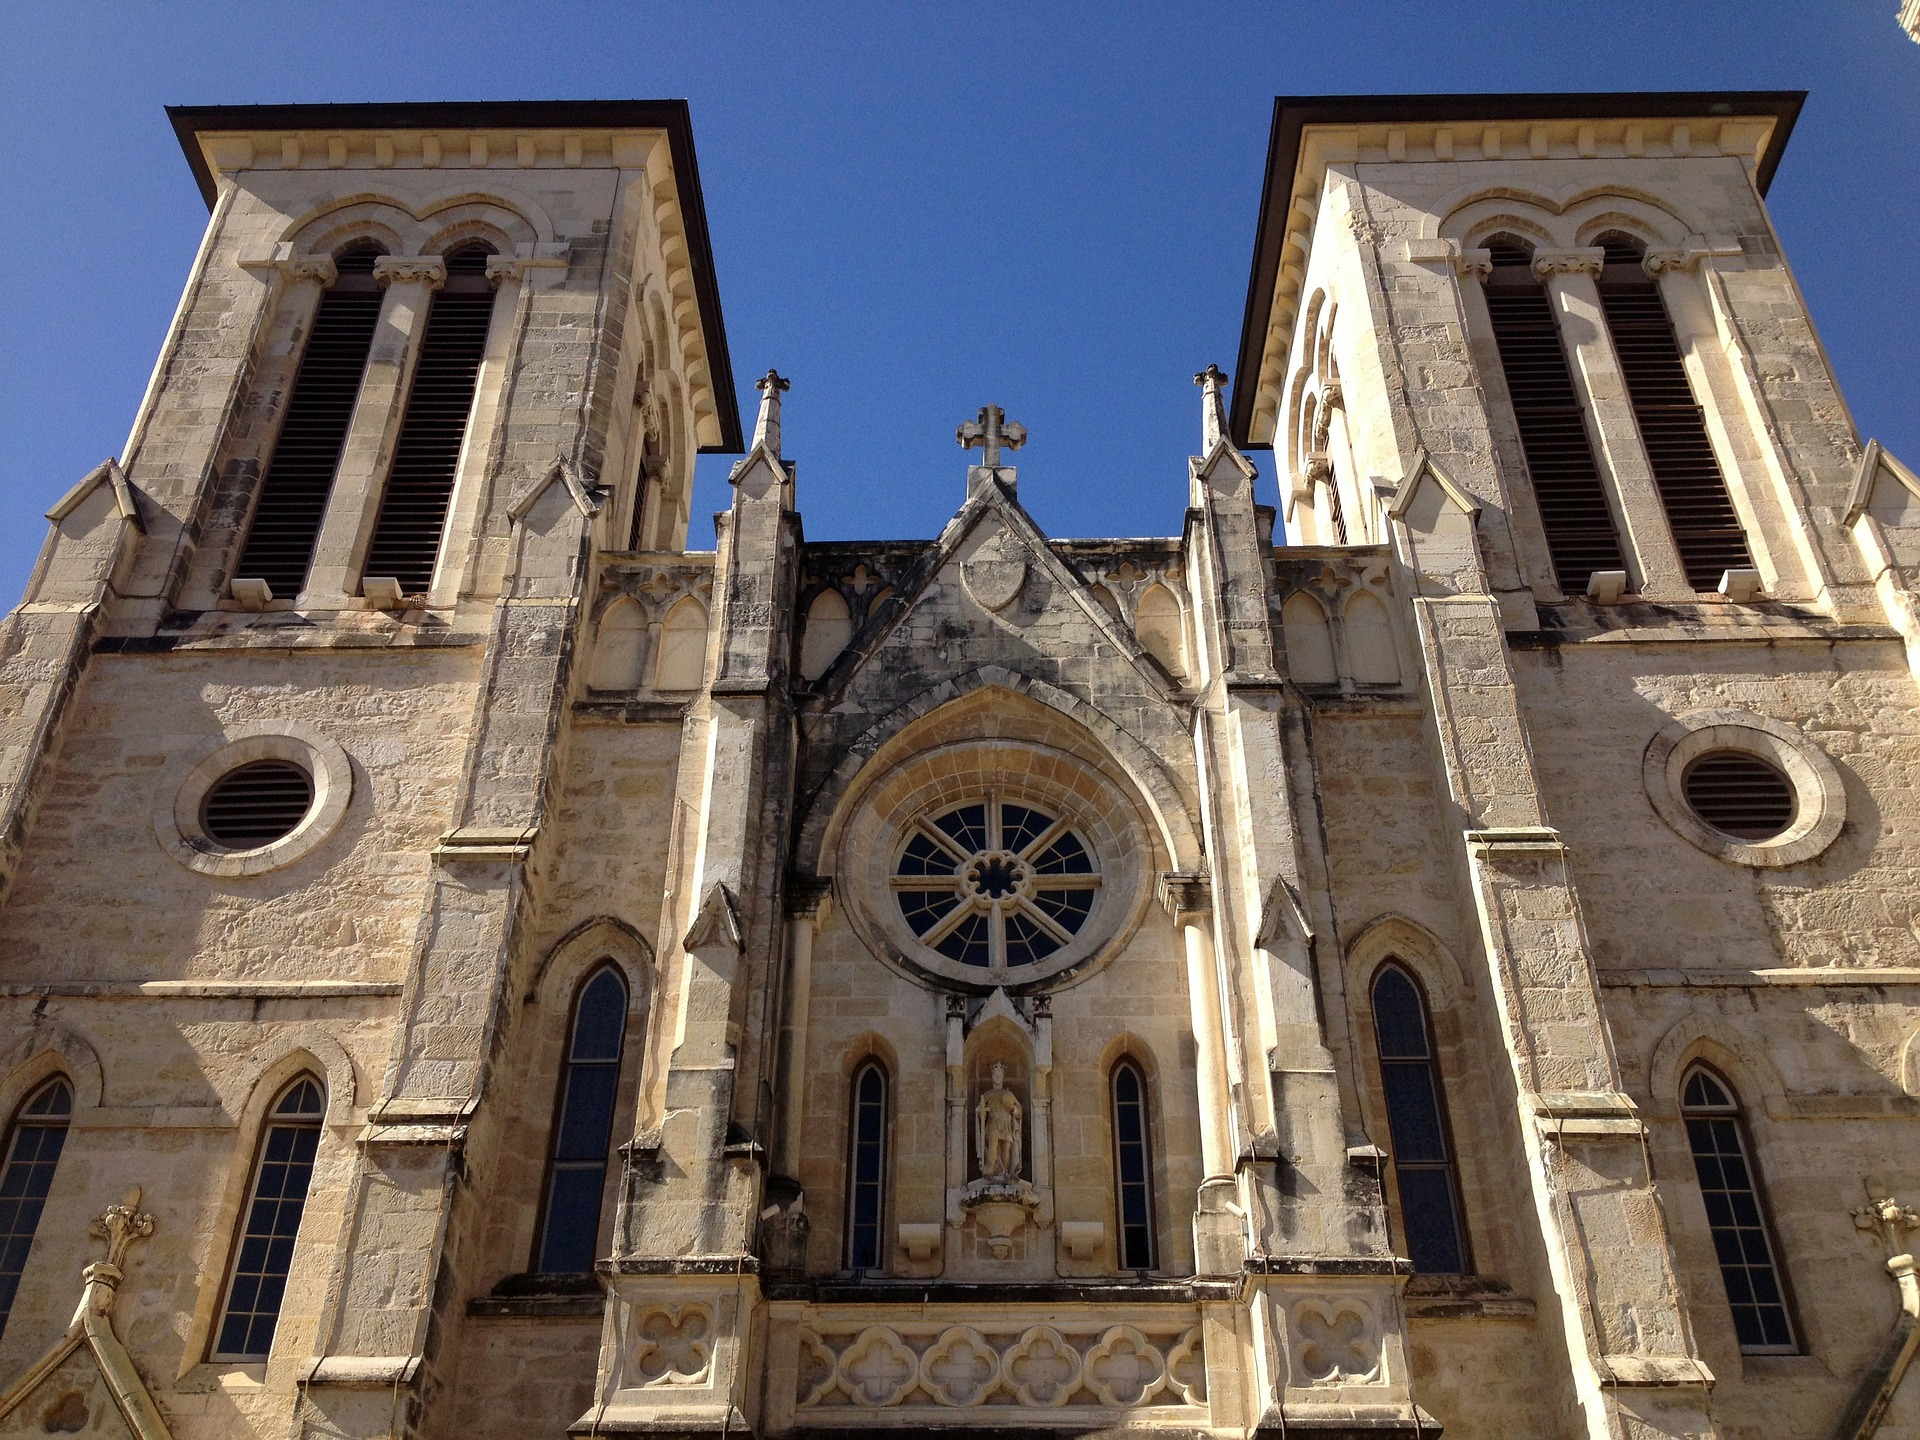 What are some historical facts about the Archdiocese of San Antonio?